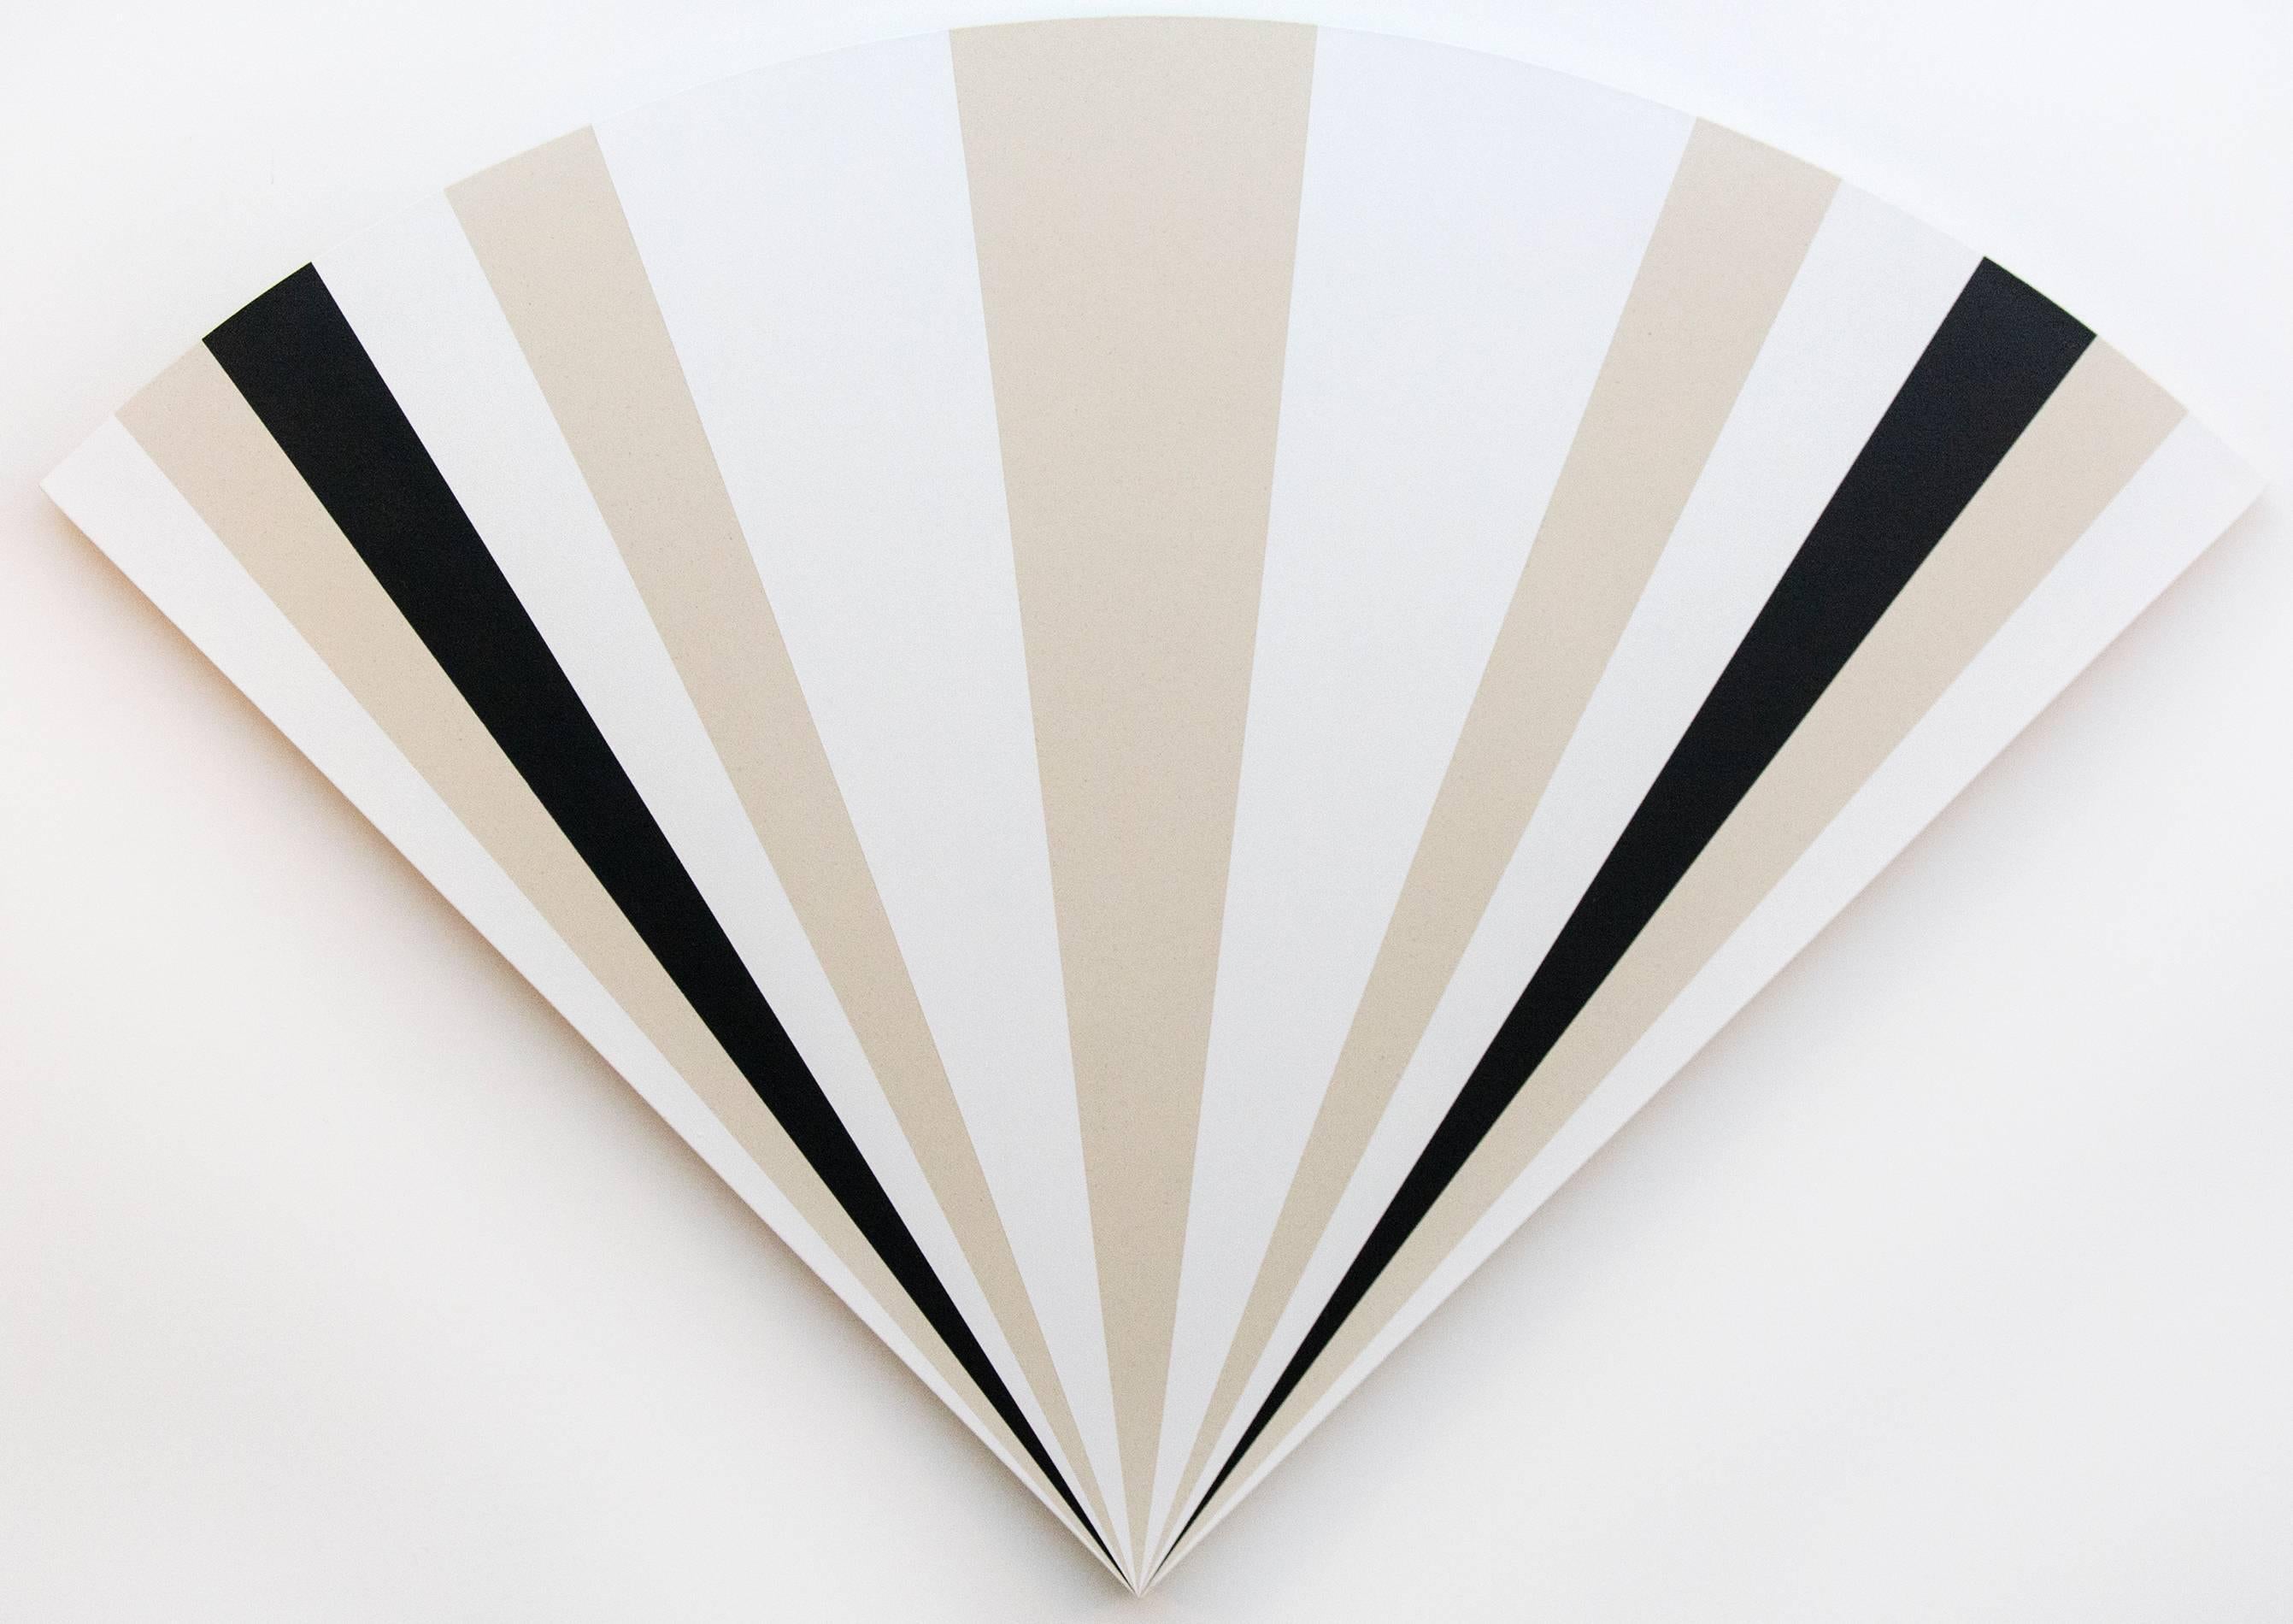 Aron Hill Abstract Painting - Fan with 1231212121321 - alternating black & white sequence in art deco style